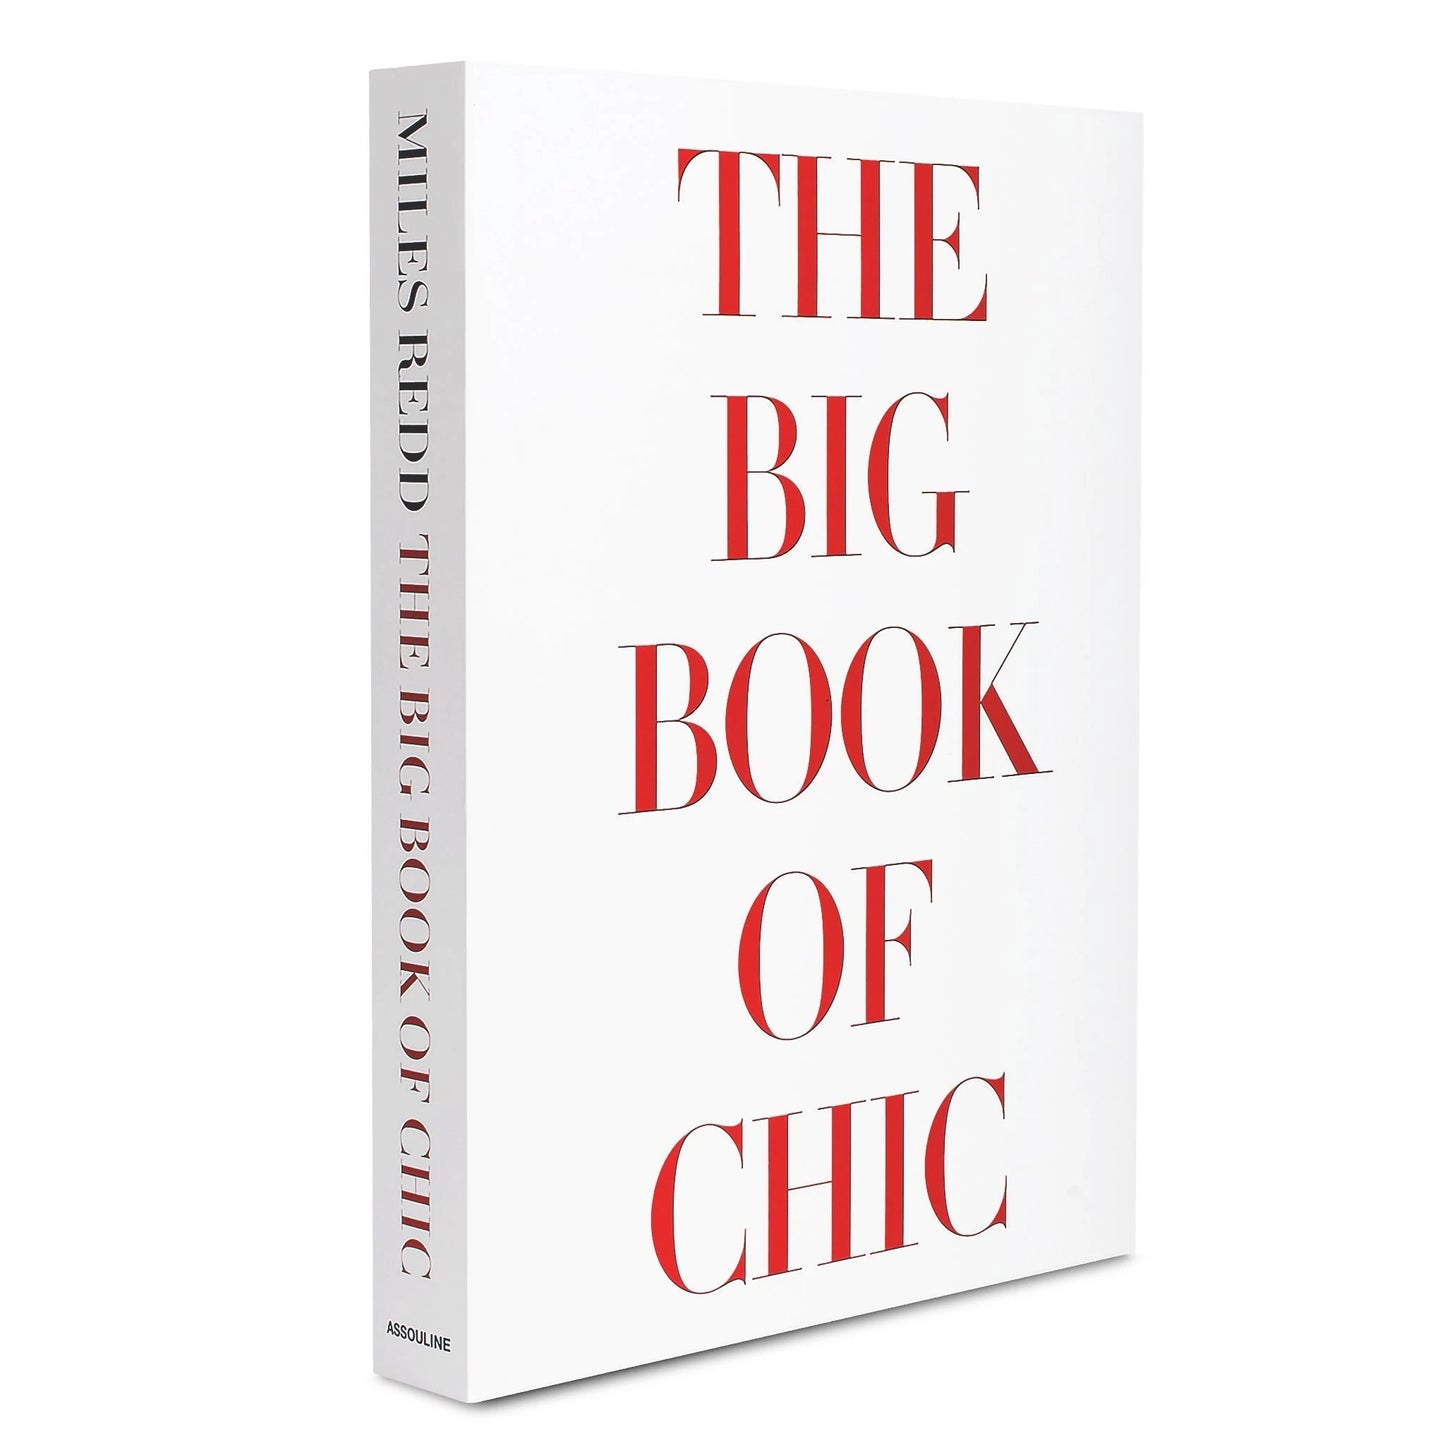 Livre The Big Book of Chic